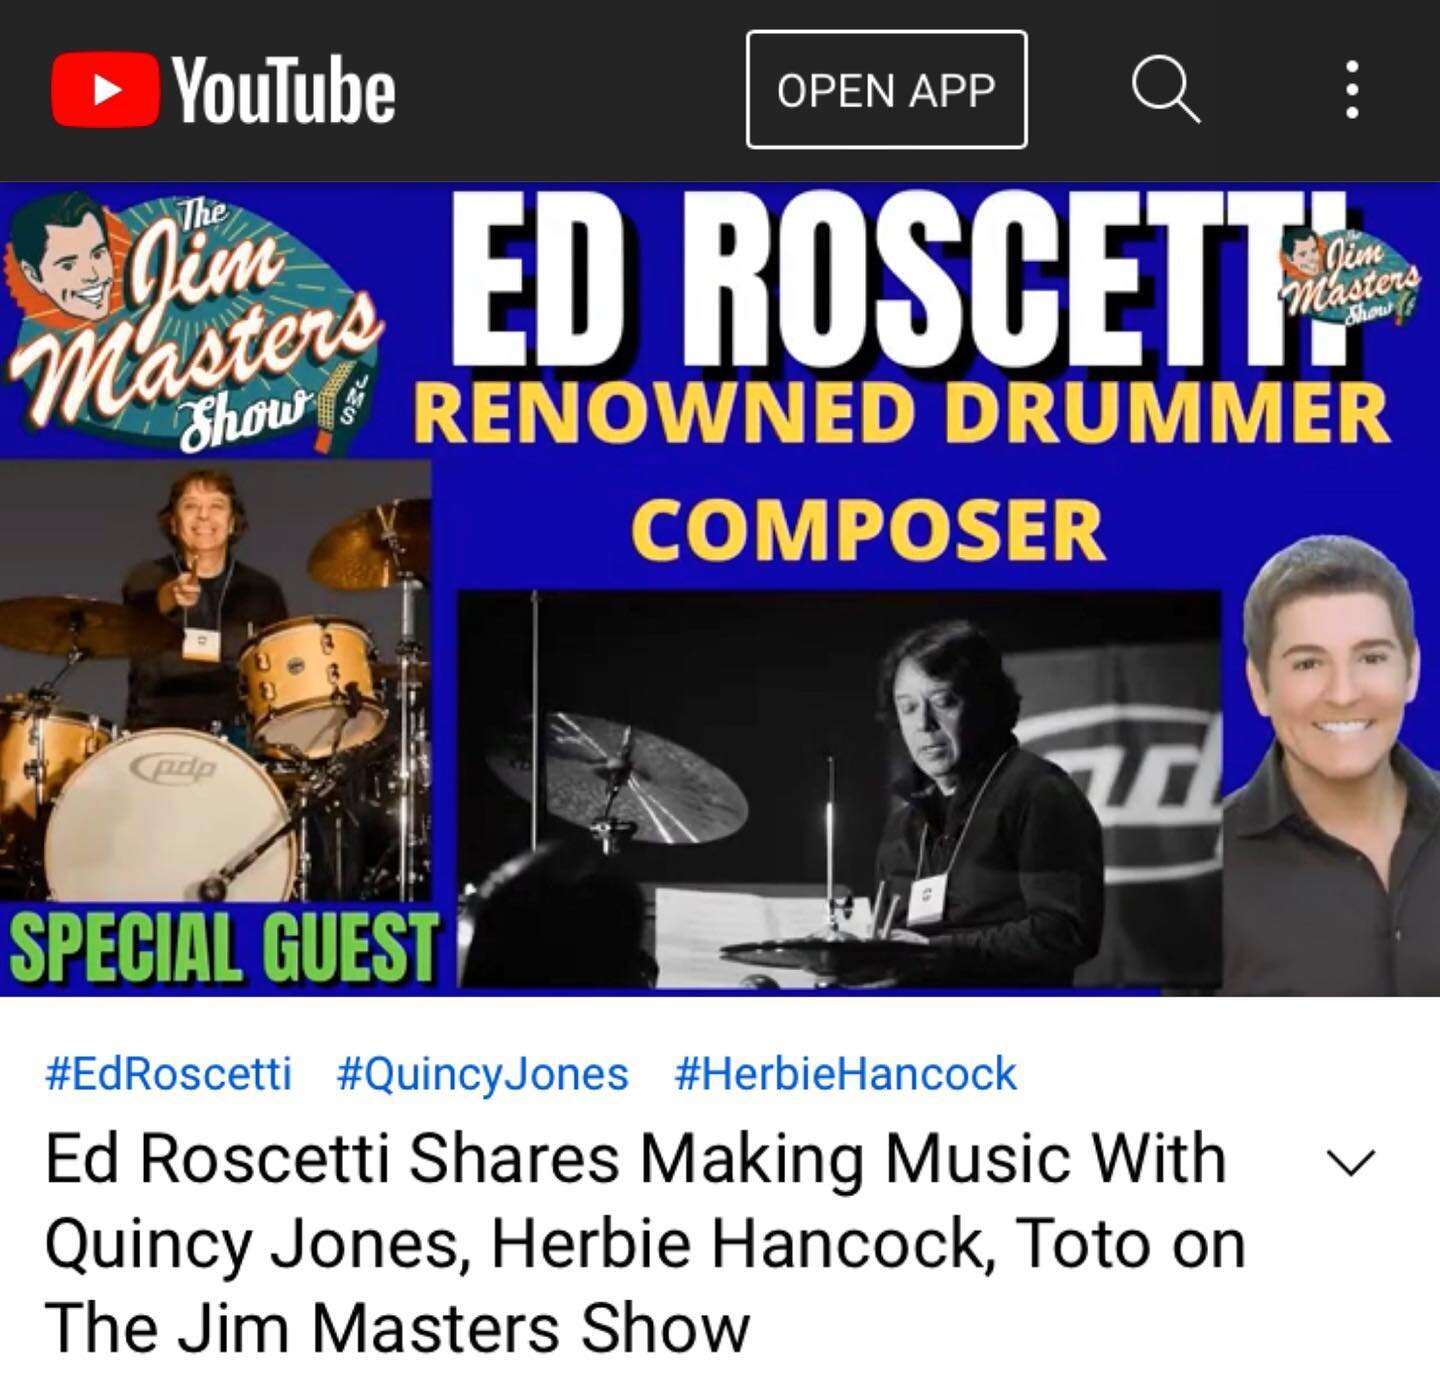 ❤️😎🌟Thanks to @jimmastersTV for a great interview of my rhythm man @roscettimusic last night on his career of composing, producing, performing 🎵 &amp; catchin&rsquo; your groove in life!❤️😎🌟🥁

YouTube link: https://youtu.be/T4nWlMkjpxY

@teampa